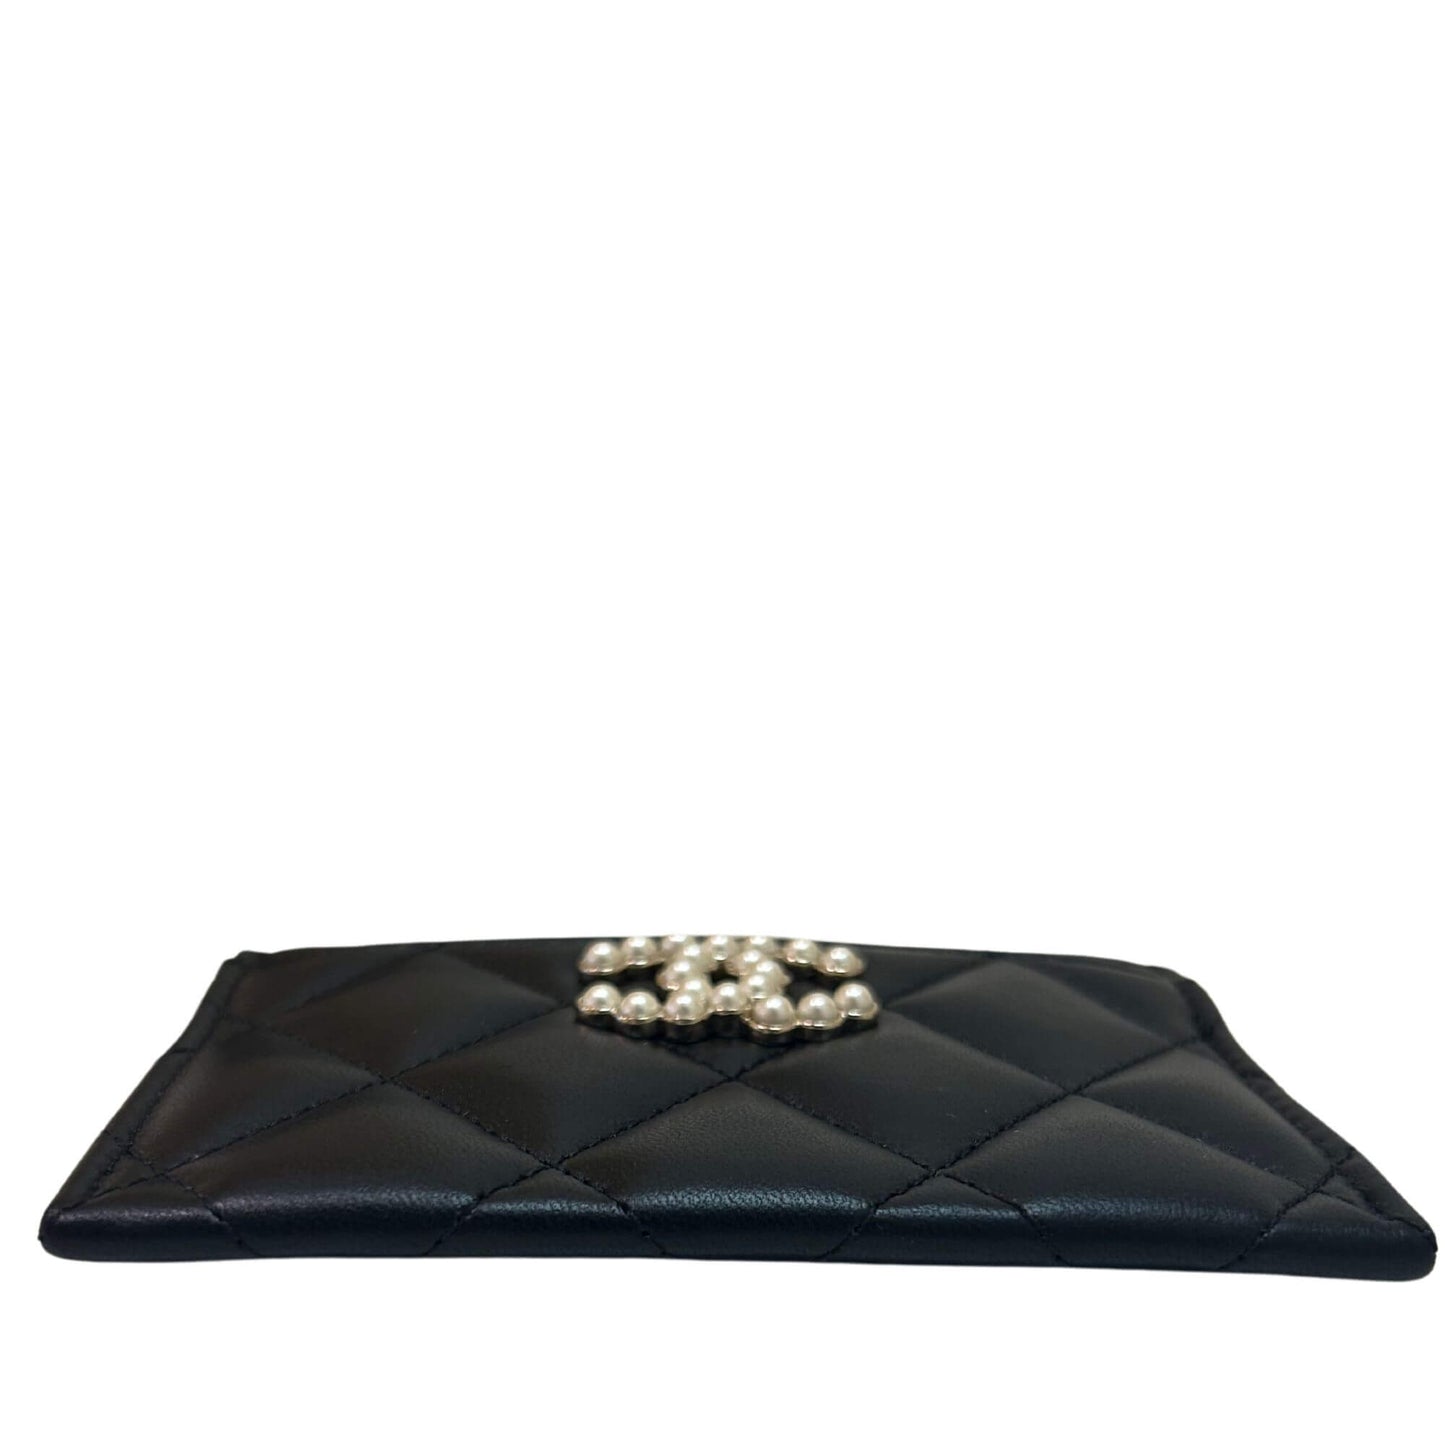 CHANEL BLACK LEATHER CLASSIC PEARLS CARDHOLDER